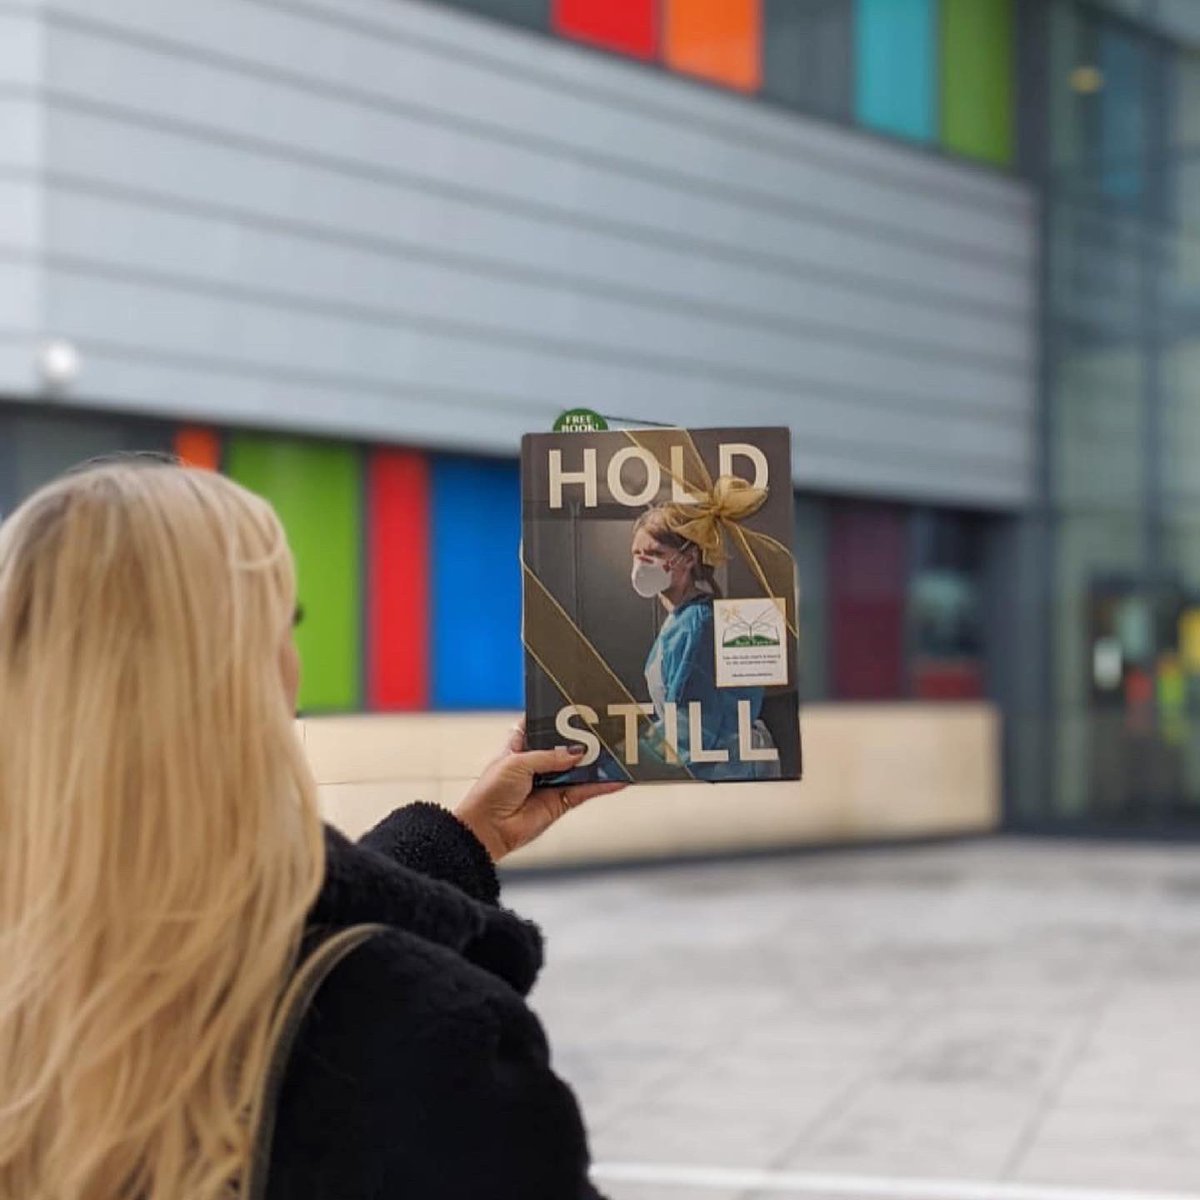 I am joining The Book Fairies and hiding a copy of the beautiful book Hold Still. One of my photographs is featured in the collection! #HSBookFairies #ibelieveInbookfairies #HoldStill2020